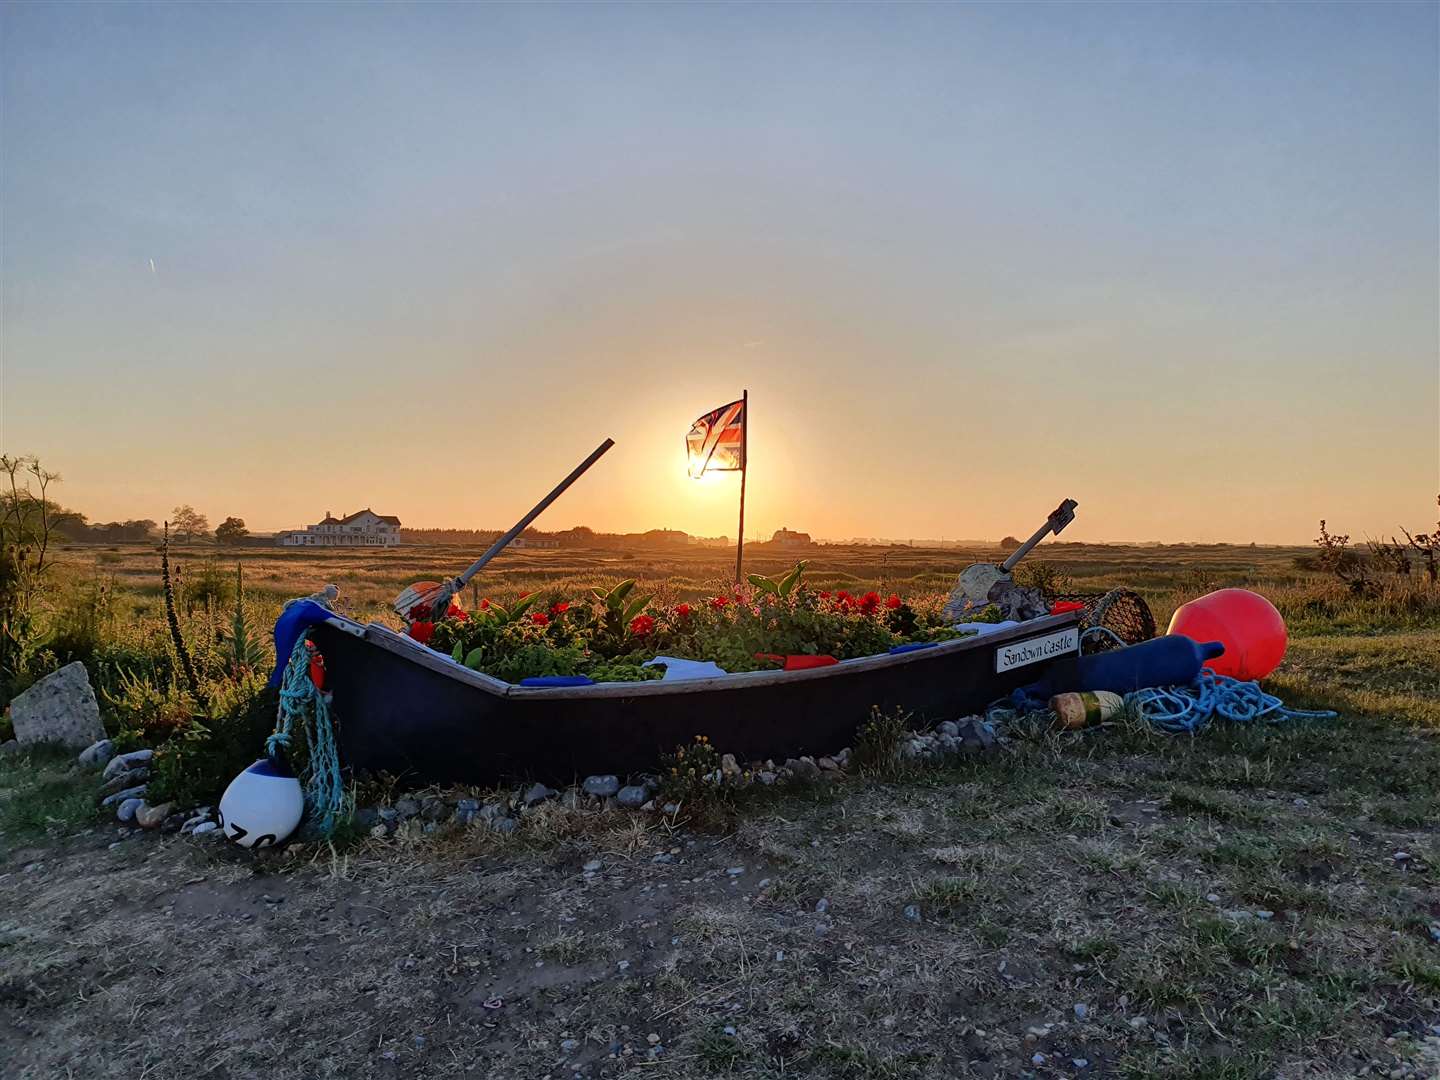 The flower packed boat has long been an attraction on the seafront. David Tilby's Sunset at Sandown Community Garden won the Mercury's photo competition and is on the front page of the 2021 calendar.